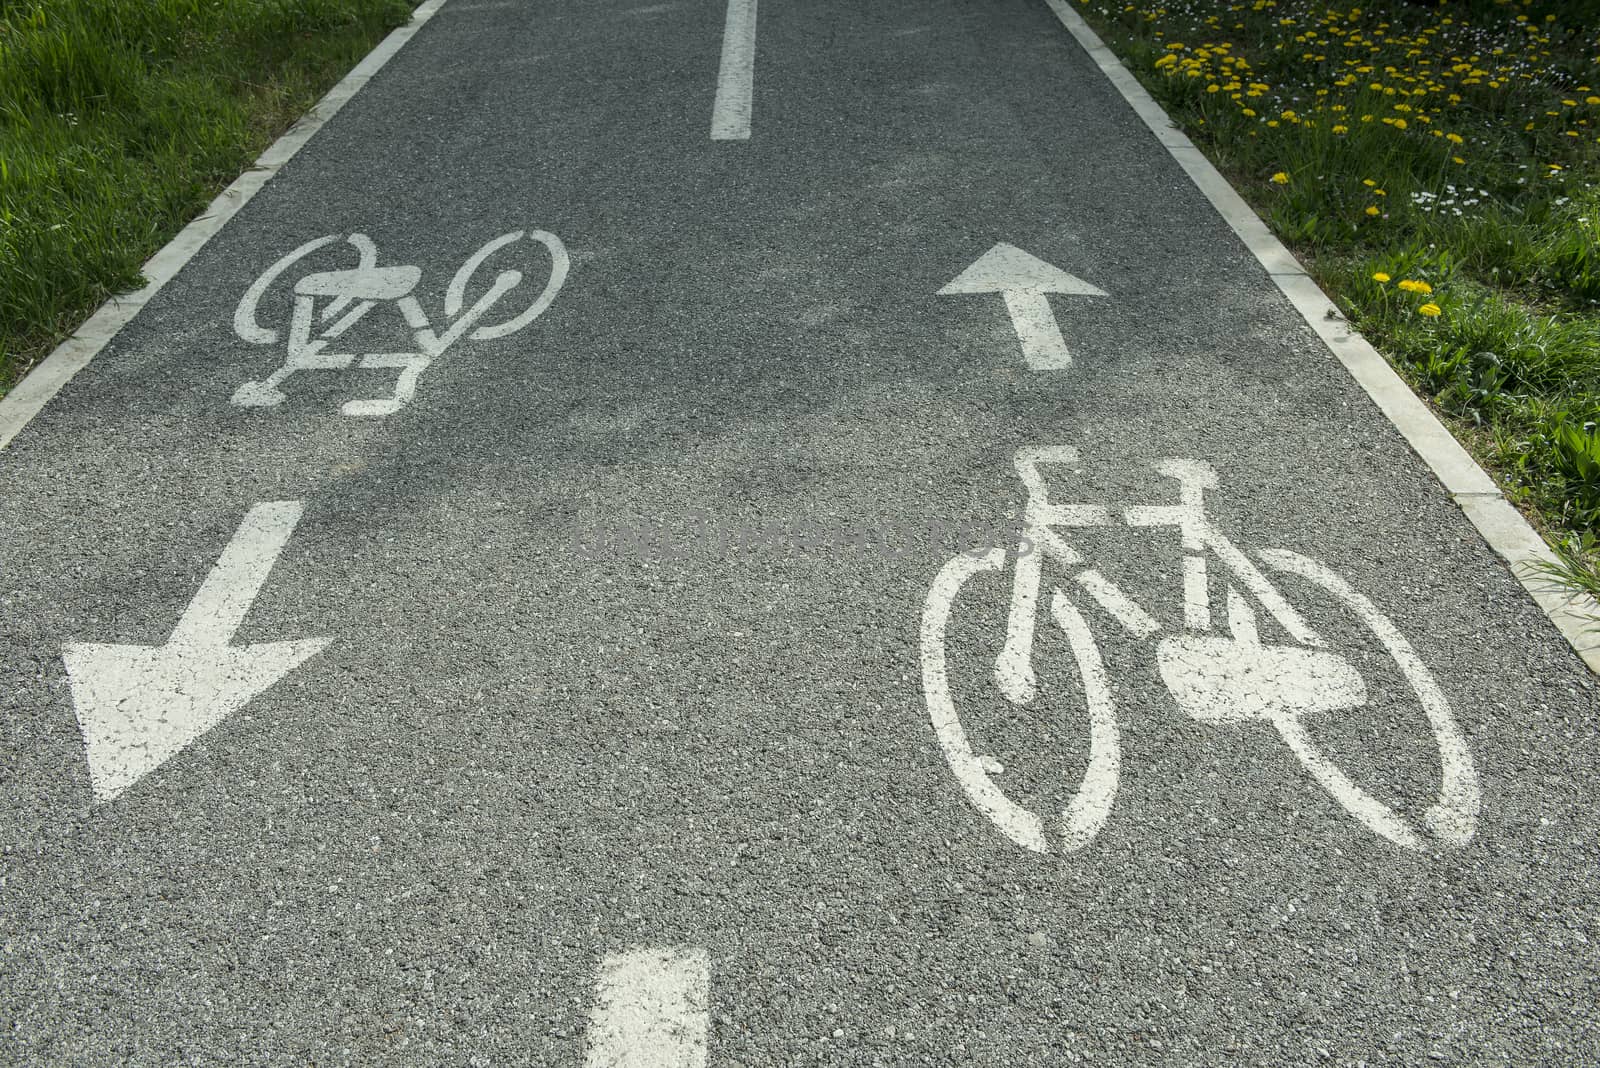 indication of a cycle track on the asphalt